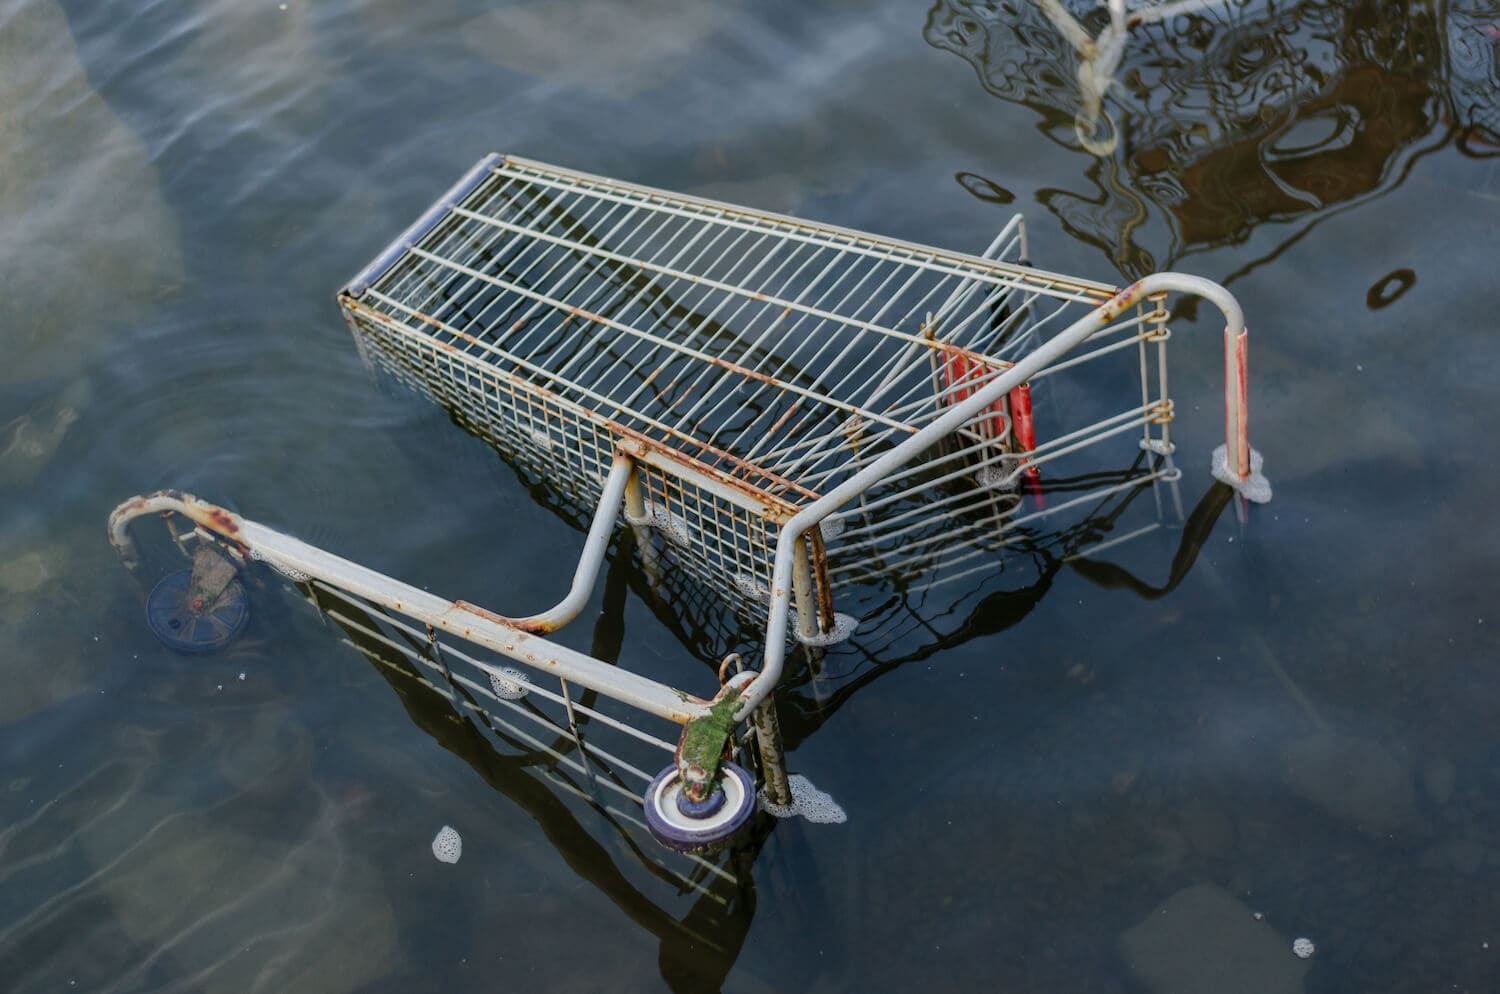 Abandoned Shopping Carts - How To Capture Those Losses Featured Image